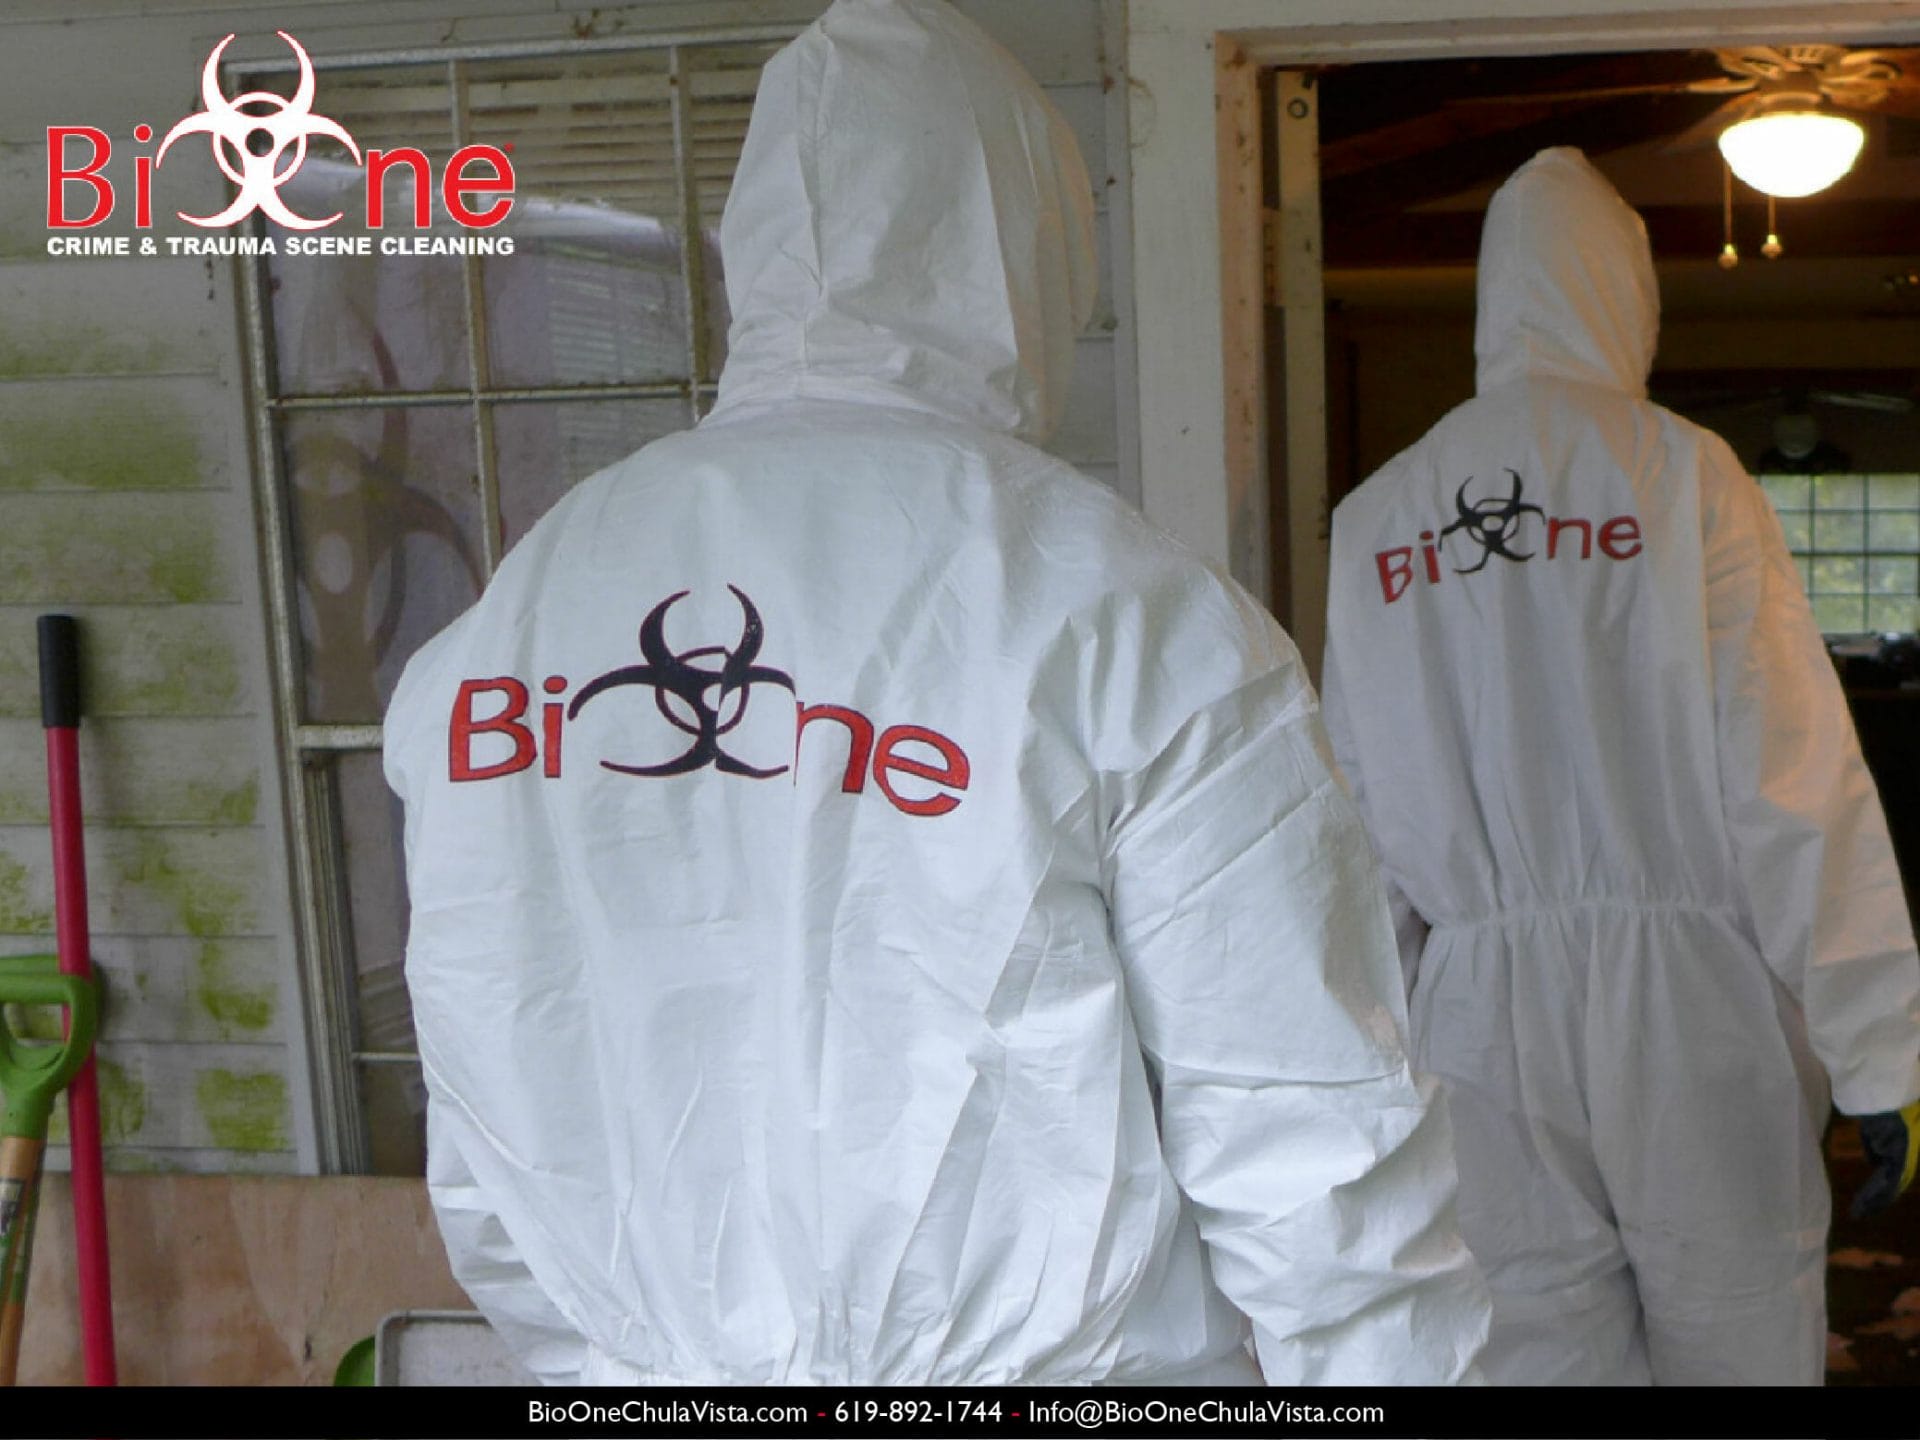 Image shows Bio-One restoration technicians dressed in full PPE entering a house.